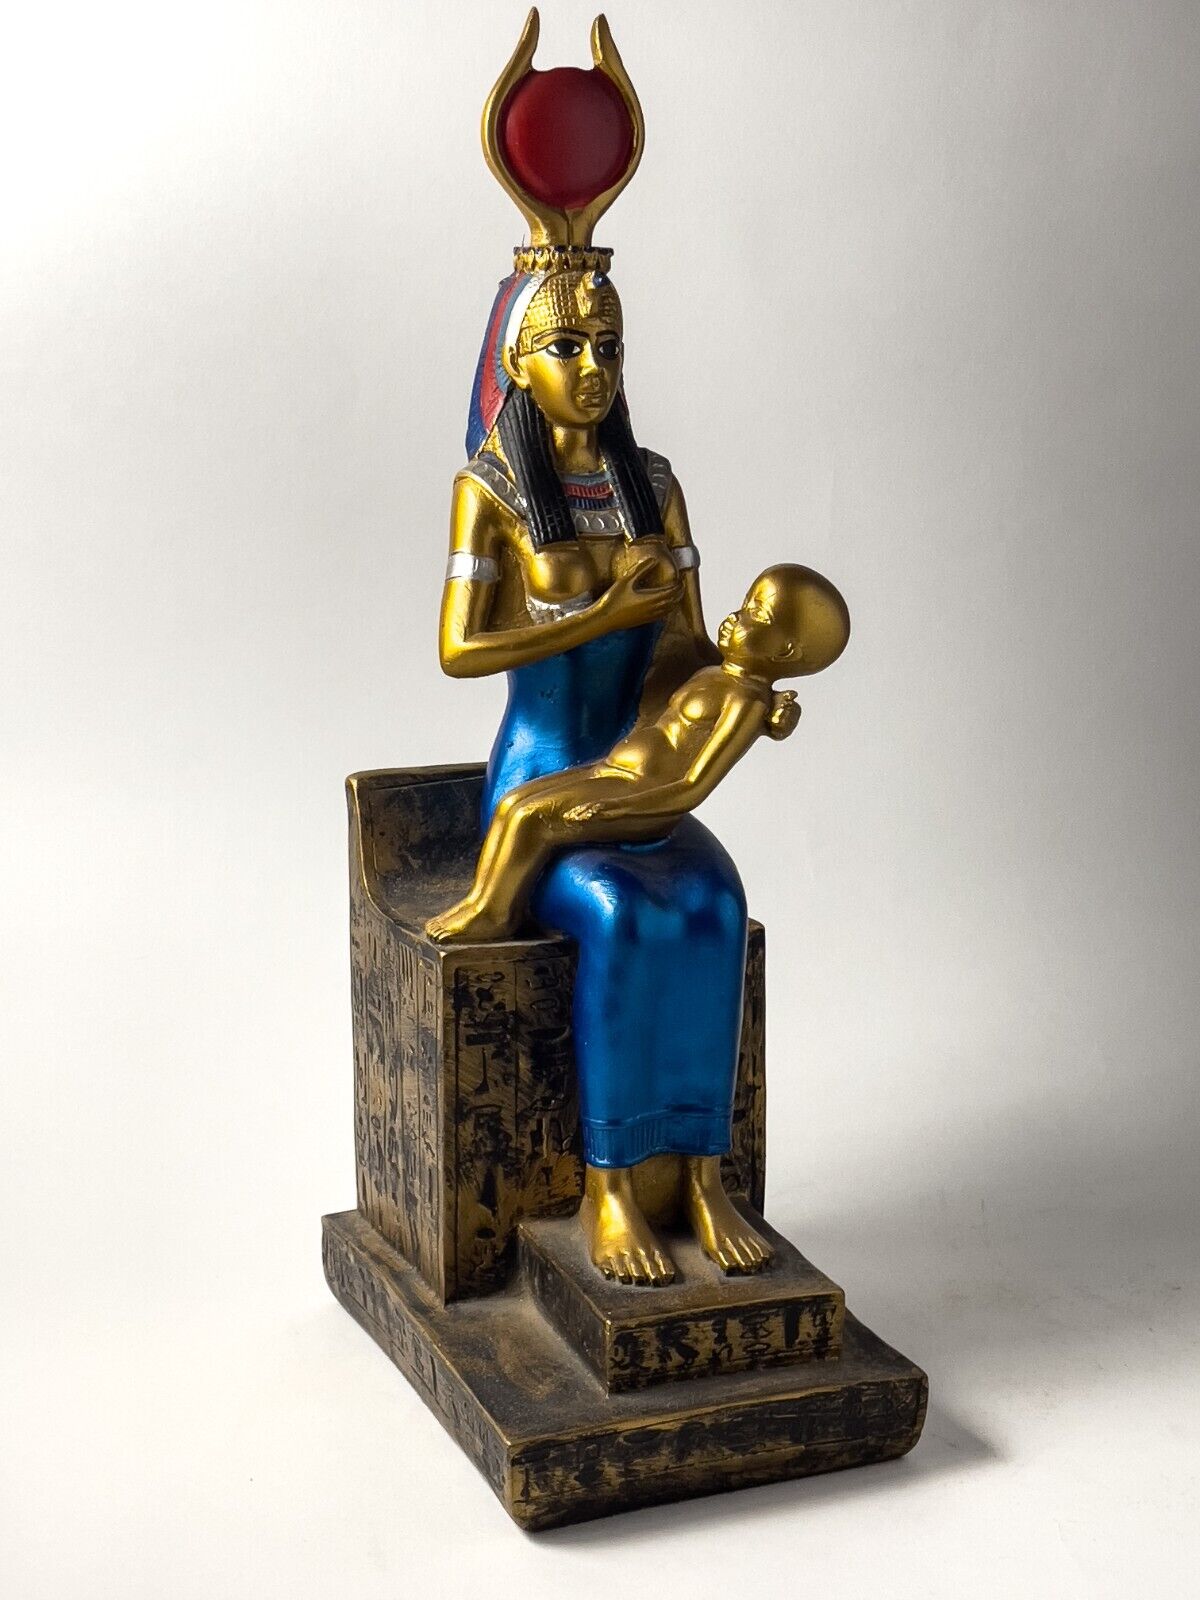 Coloured Isis Statue Breastfeeding her son in an epic scene , Handmade Statuette